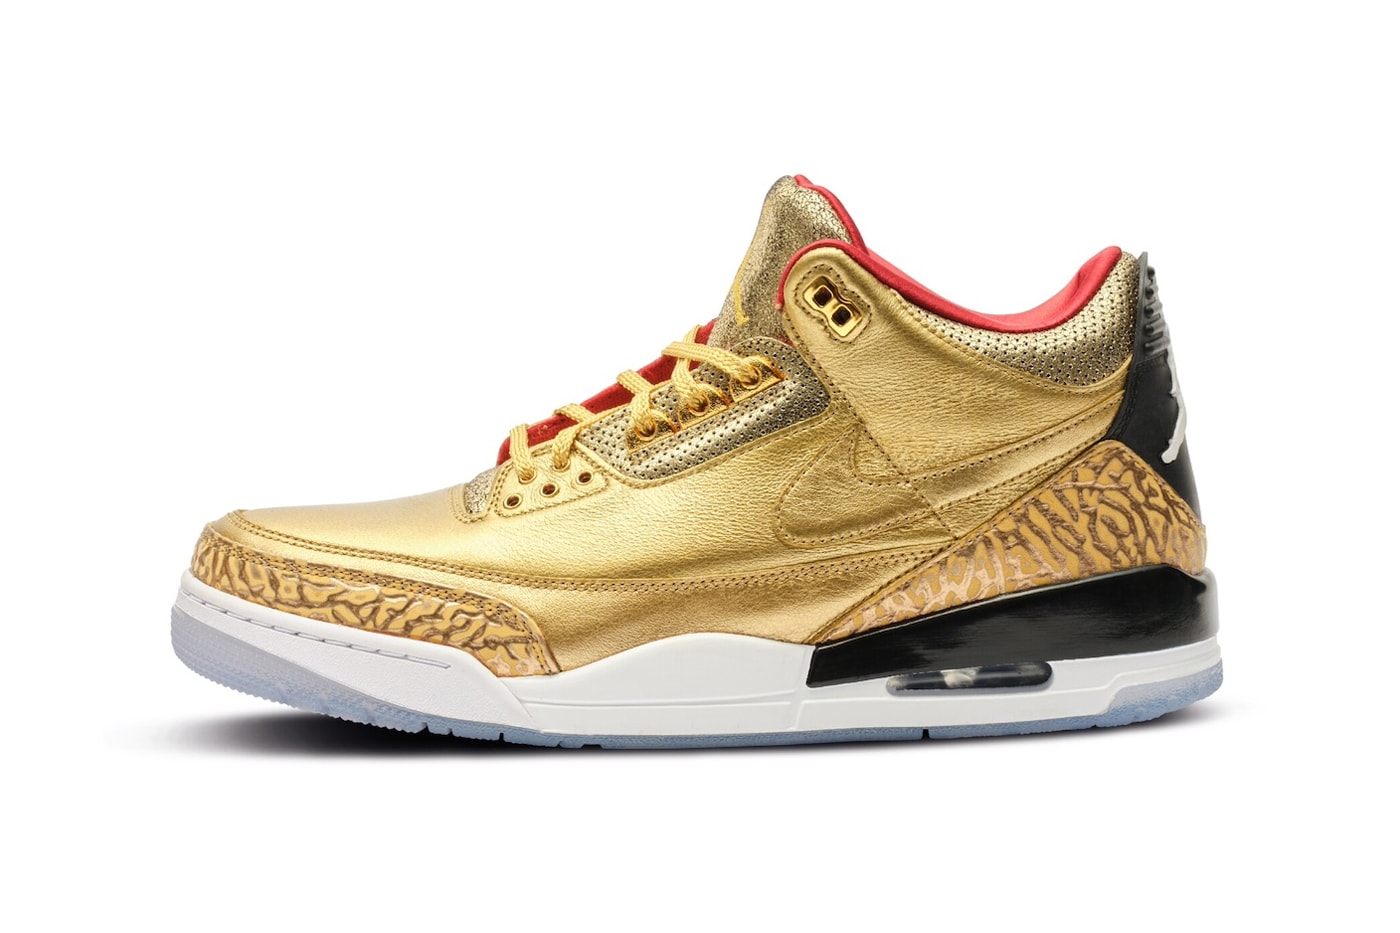 Spike Lee's Air Jordan 3 "Gold Oscars" PE Is up For Auction sotheby's Portland Rescue Mission vvalued between 15000 to 20000 mike and spike michael jordan jordan brand nike jumpman